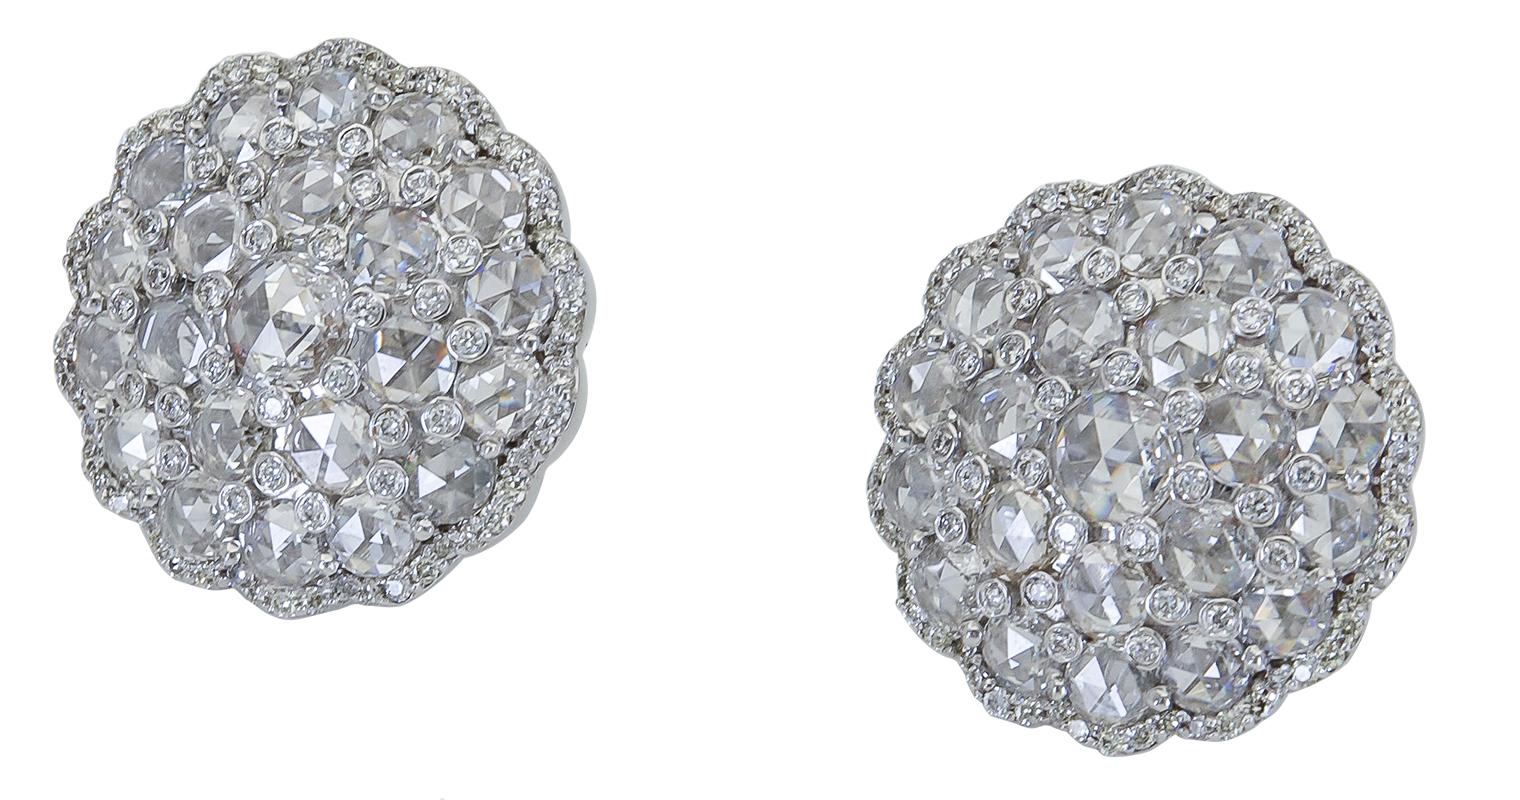 Flower design earrings showcasing a cluster of rose cut round diamonds finished with a brilliant diamond edge. Made in 18k white gold.
0.84 inches in diameter.